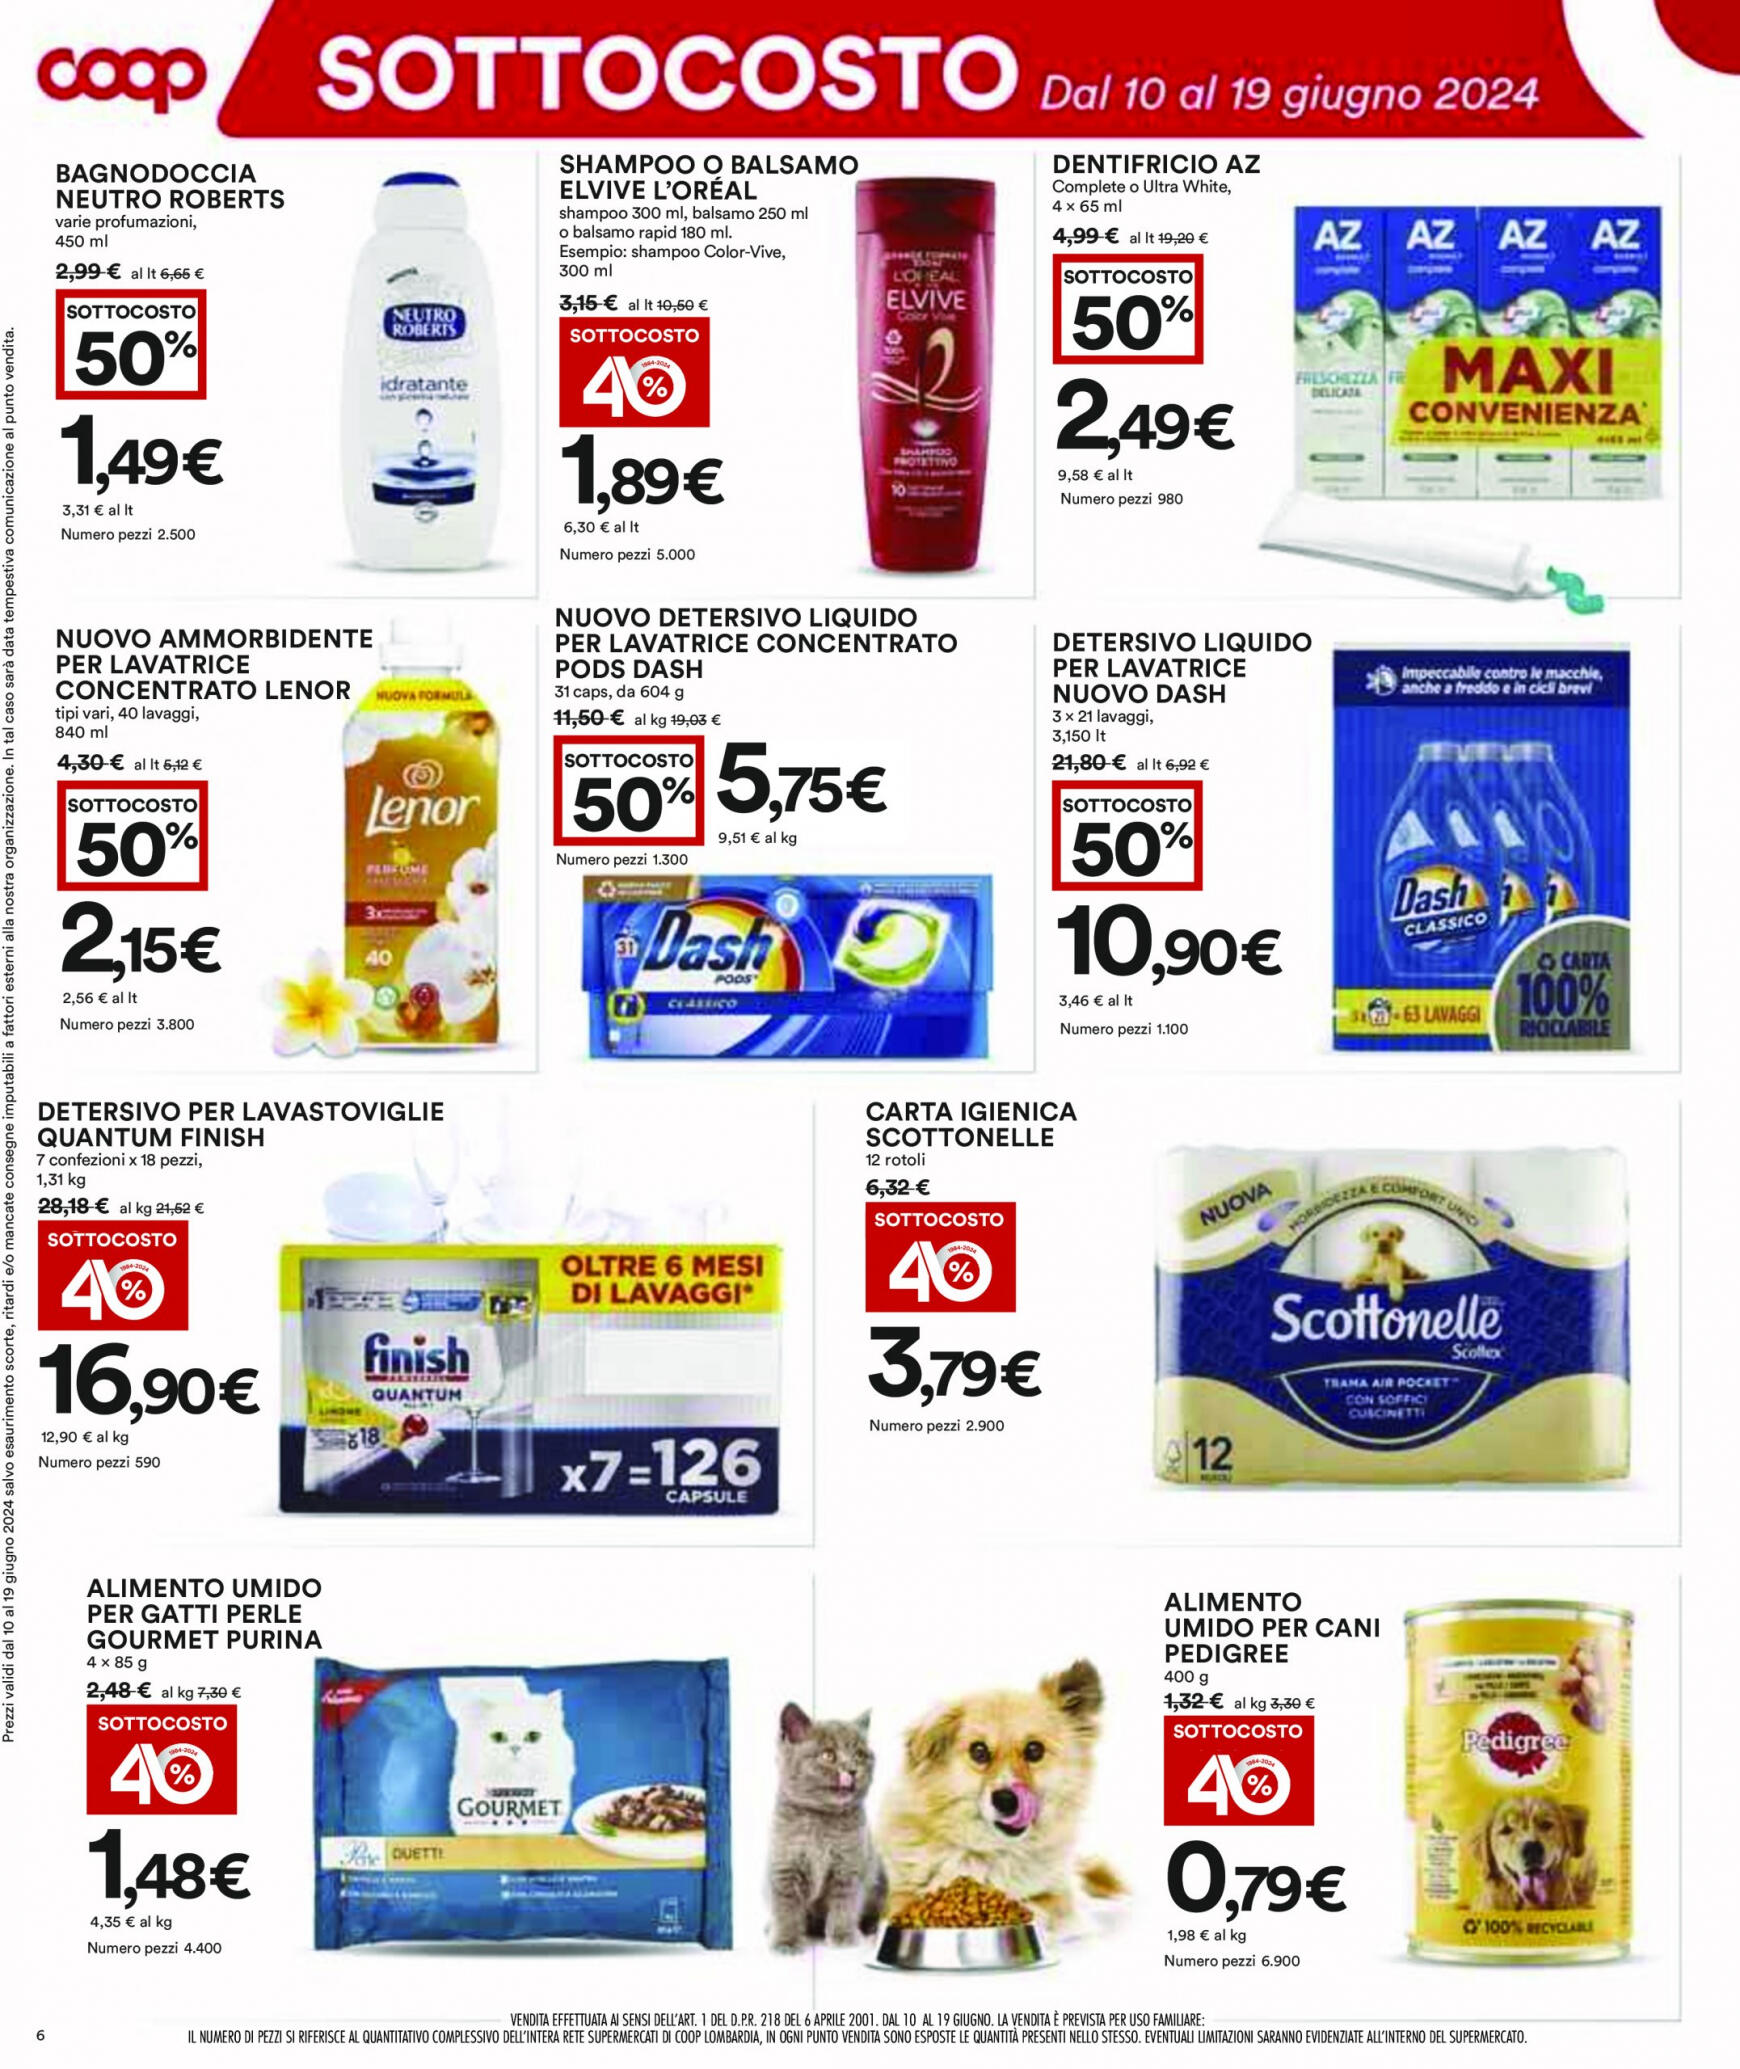 coop - Nuovo volantino Coop 10.06. - 19.06. - page: 6